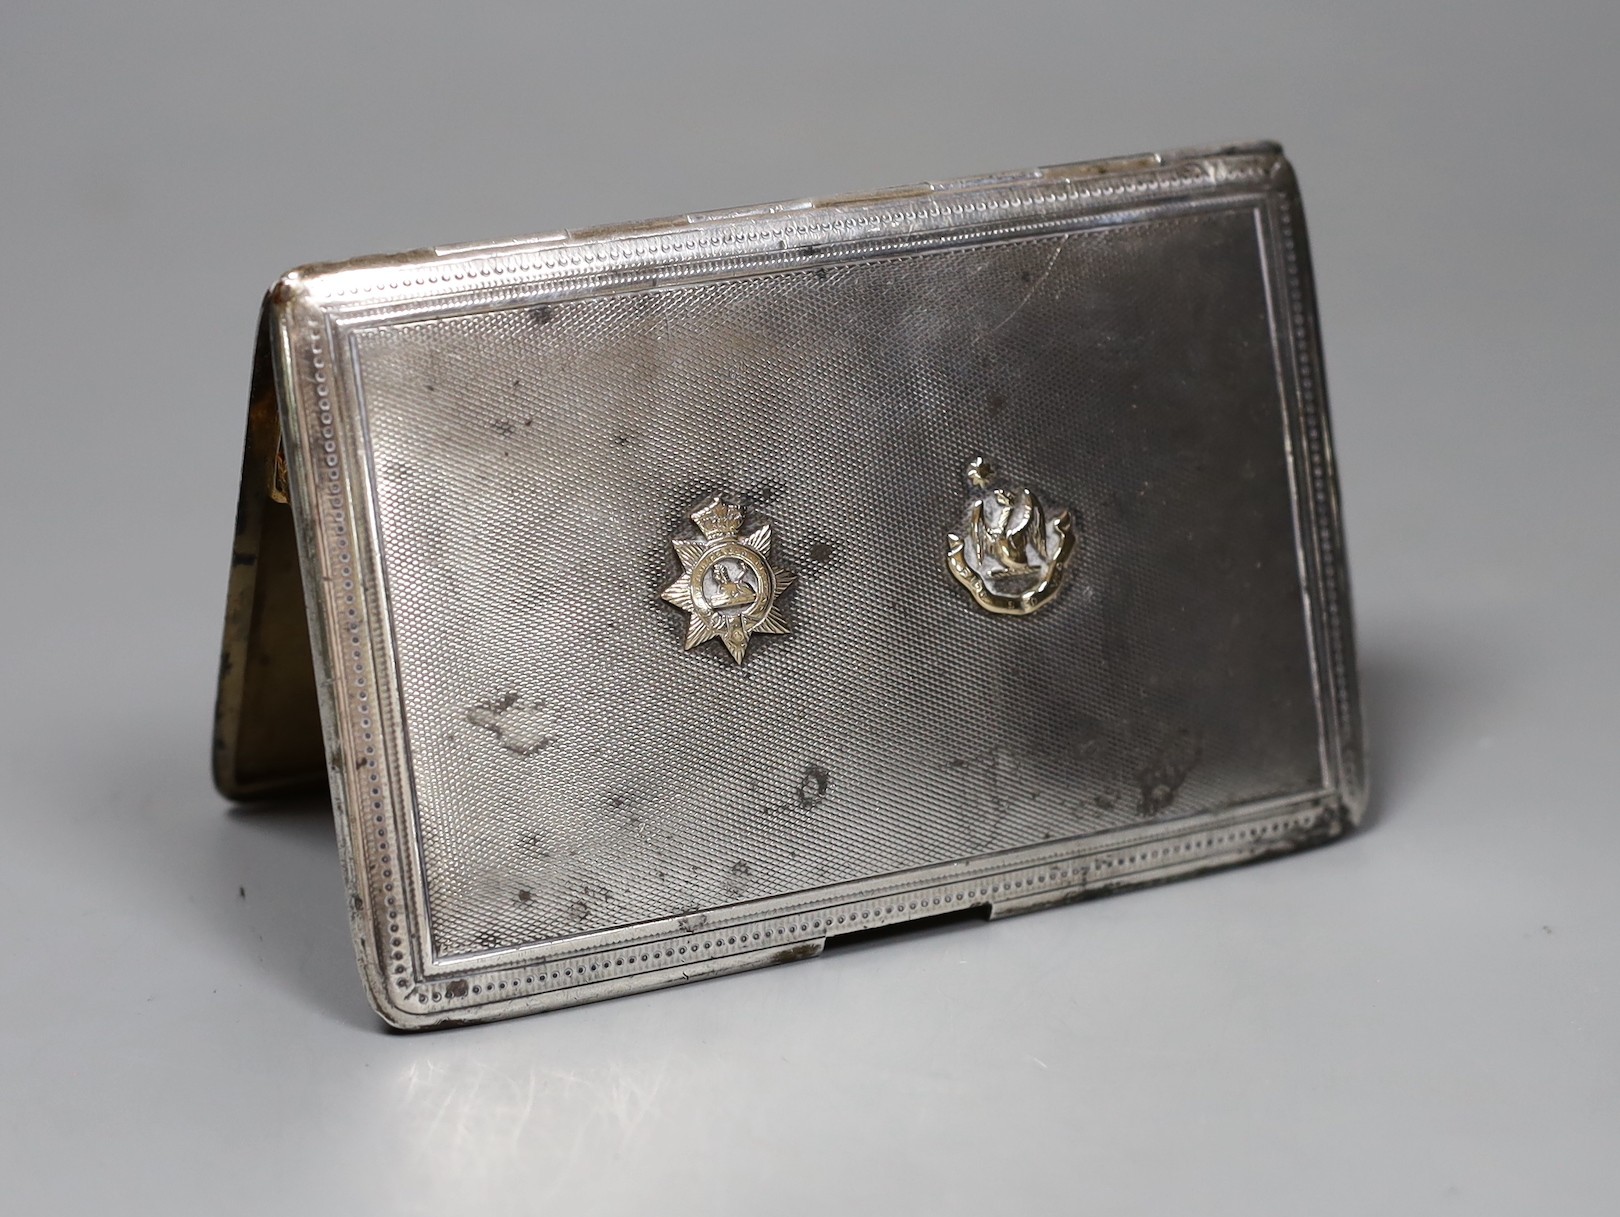 A Finnigans silver engine turned cigarette case with gilt interior mounted with gold Manchester Regiment 'Egypt' badge and family crest, London 1917, width 13cm